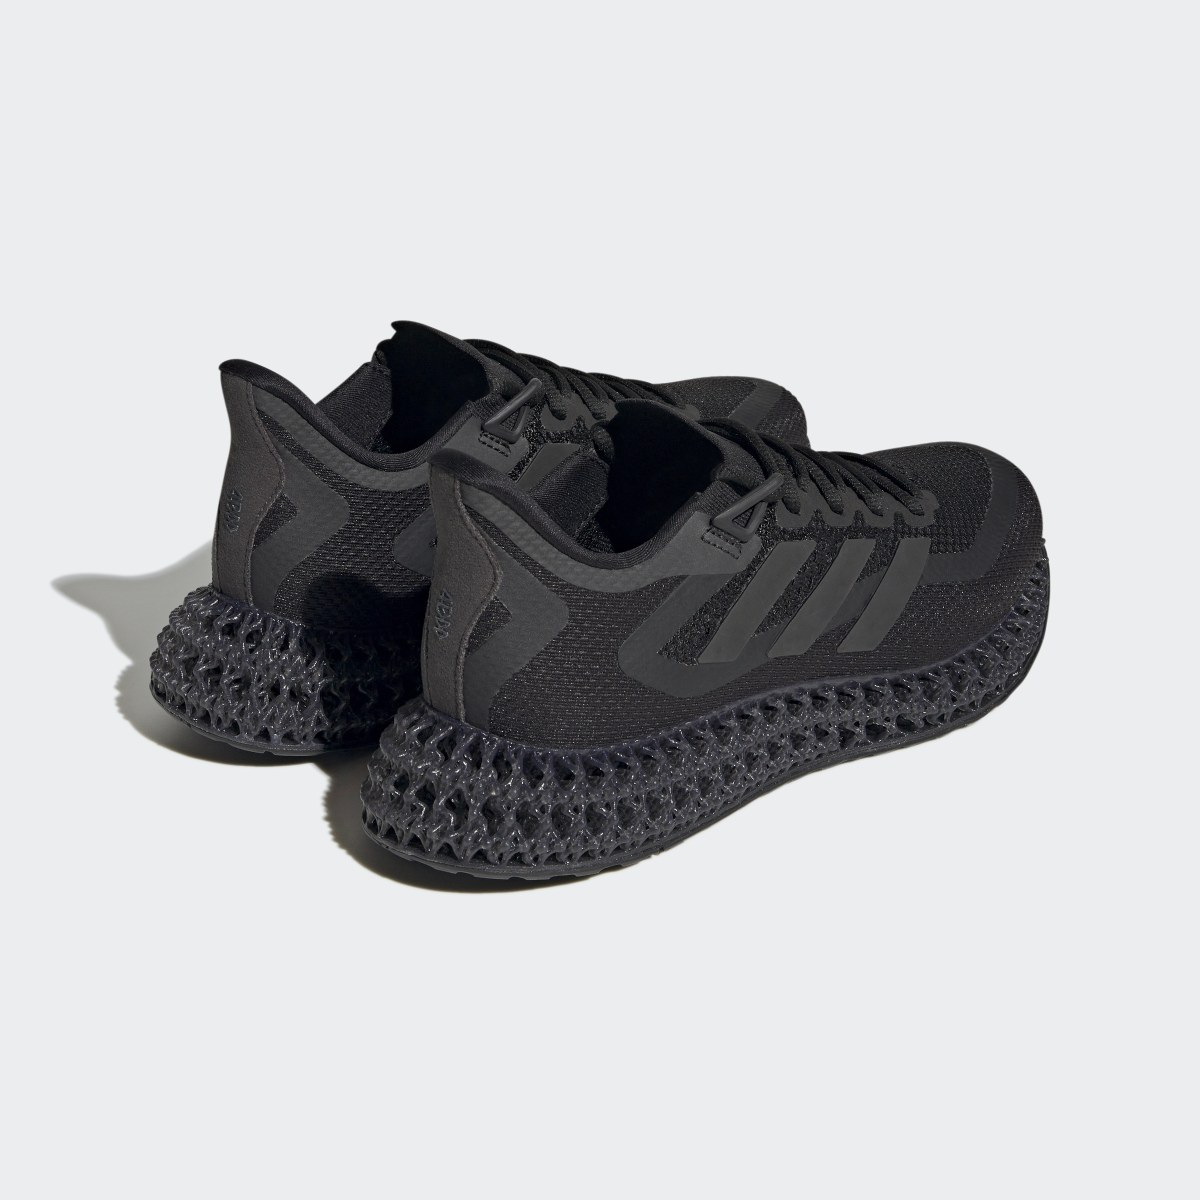 Adidas 4DFWD 2 Running Shoes. 8